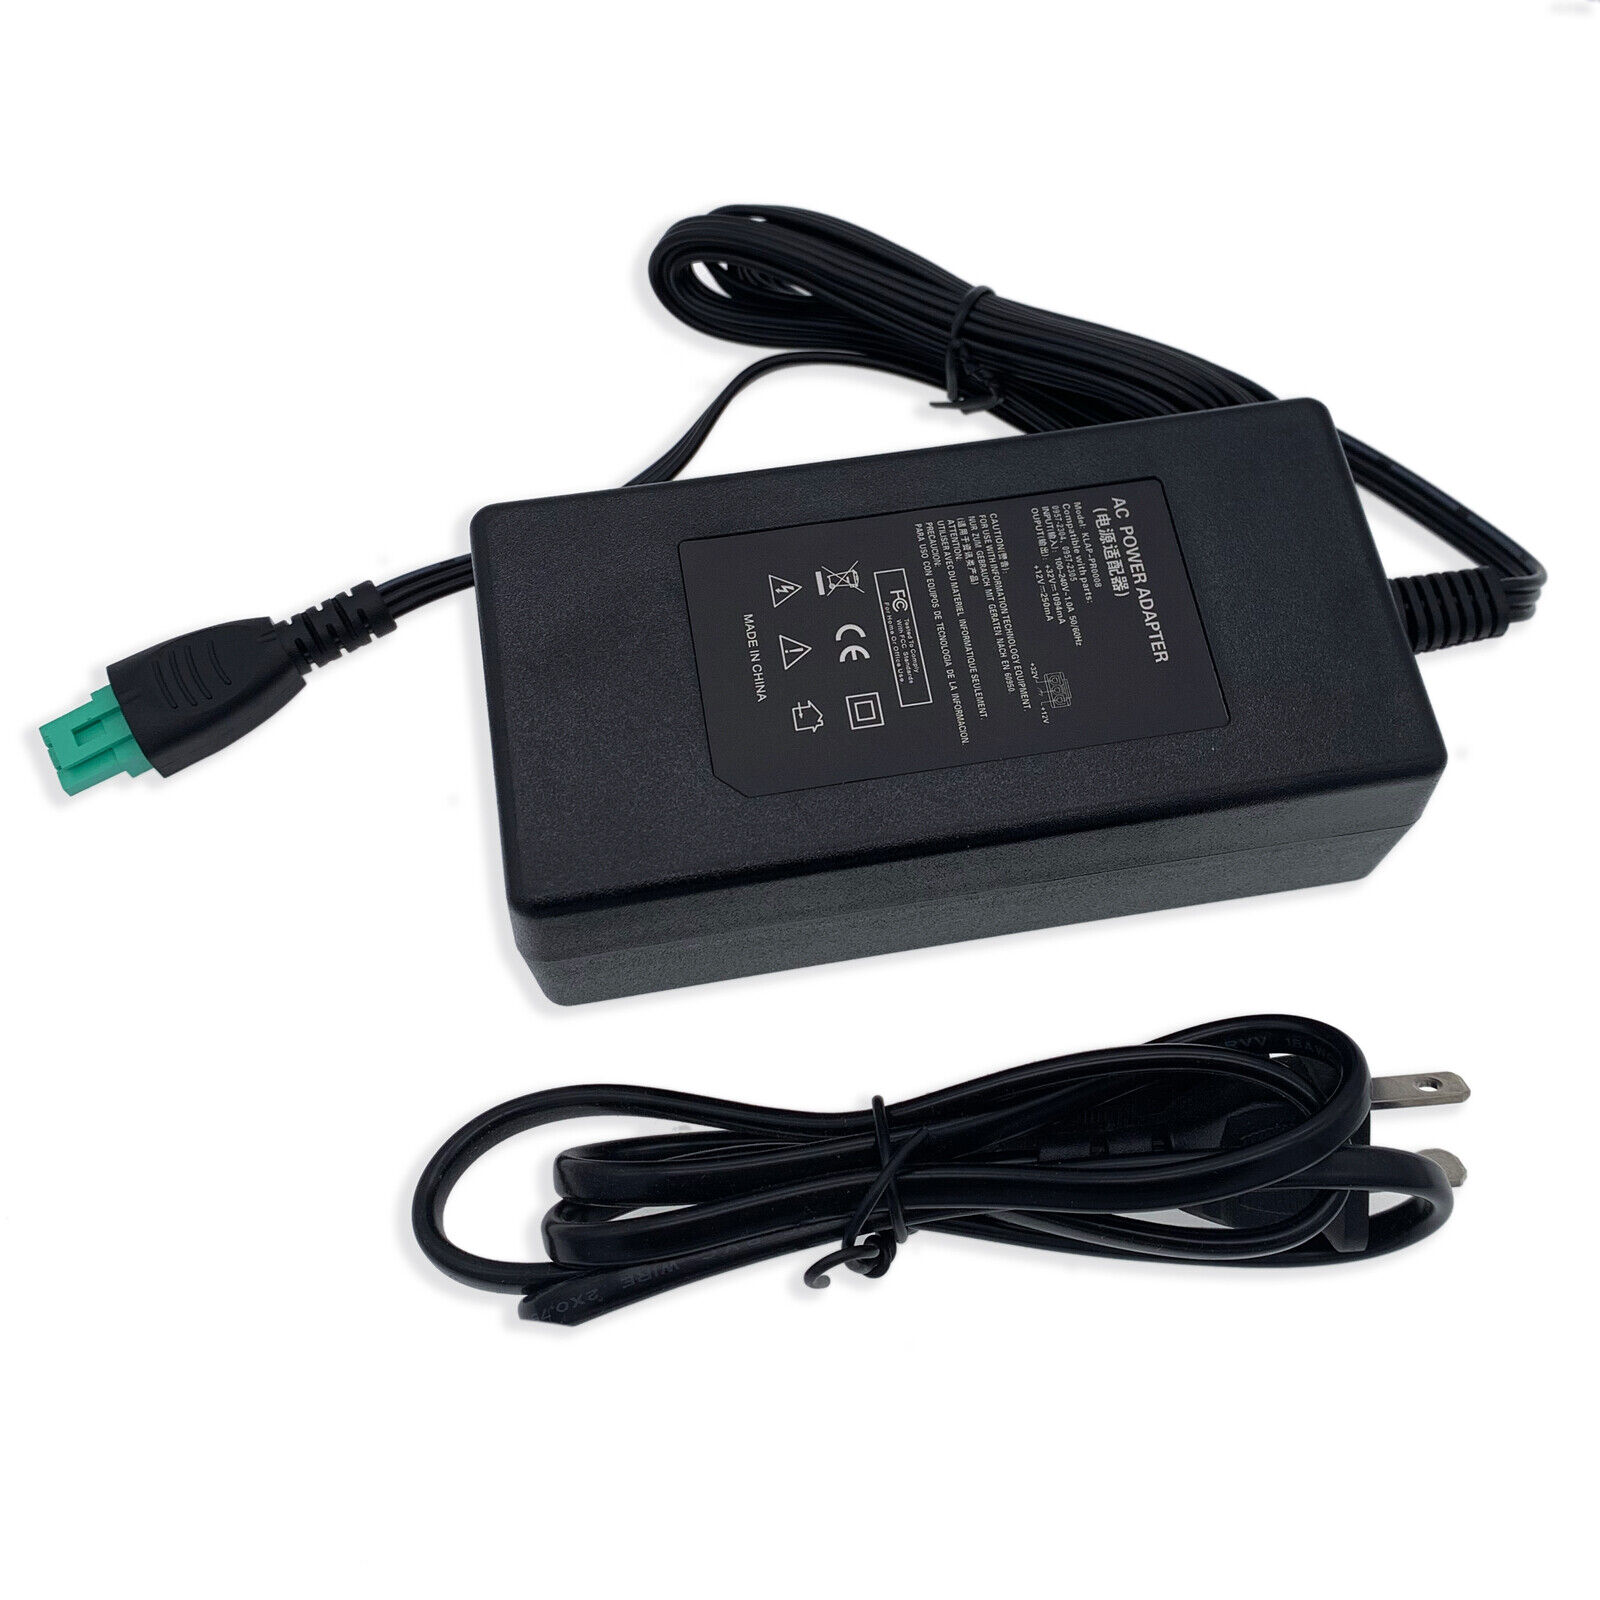 AC Adapter For HP OfficeJet 6600 6700 7110 7610 7612 Printer Charger Power Cord